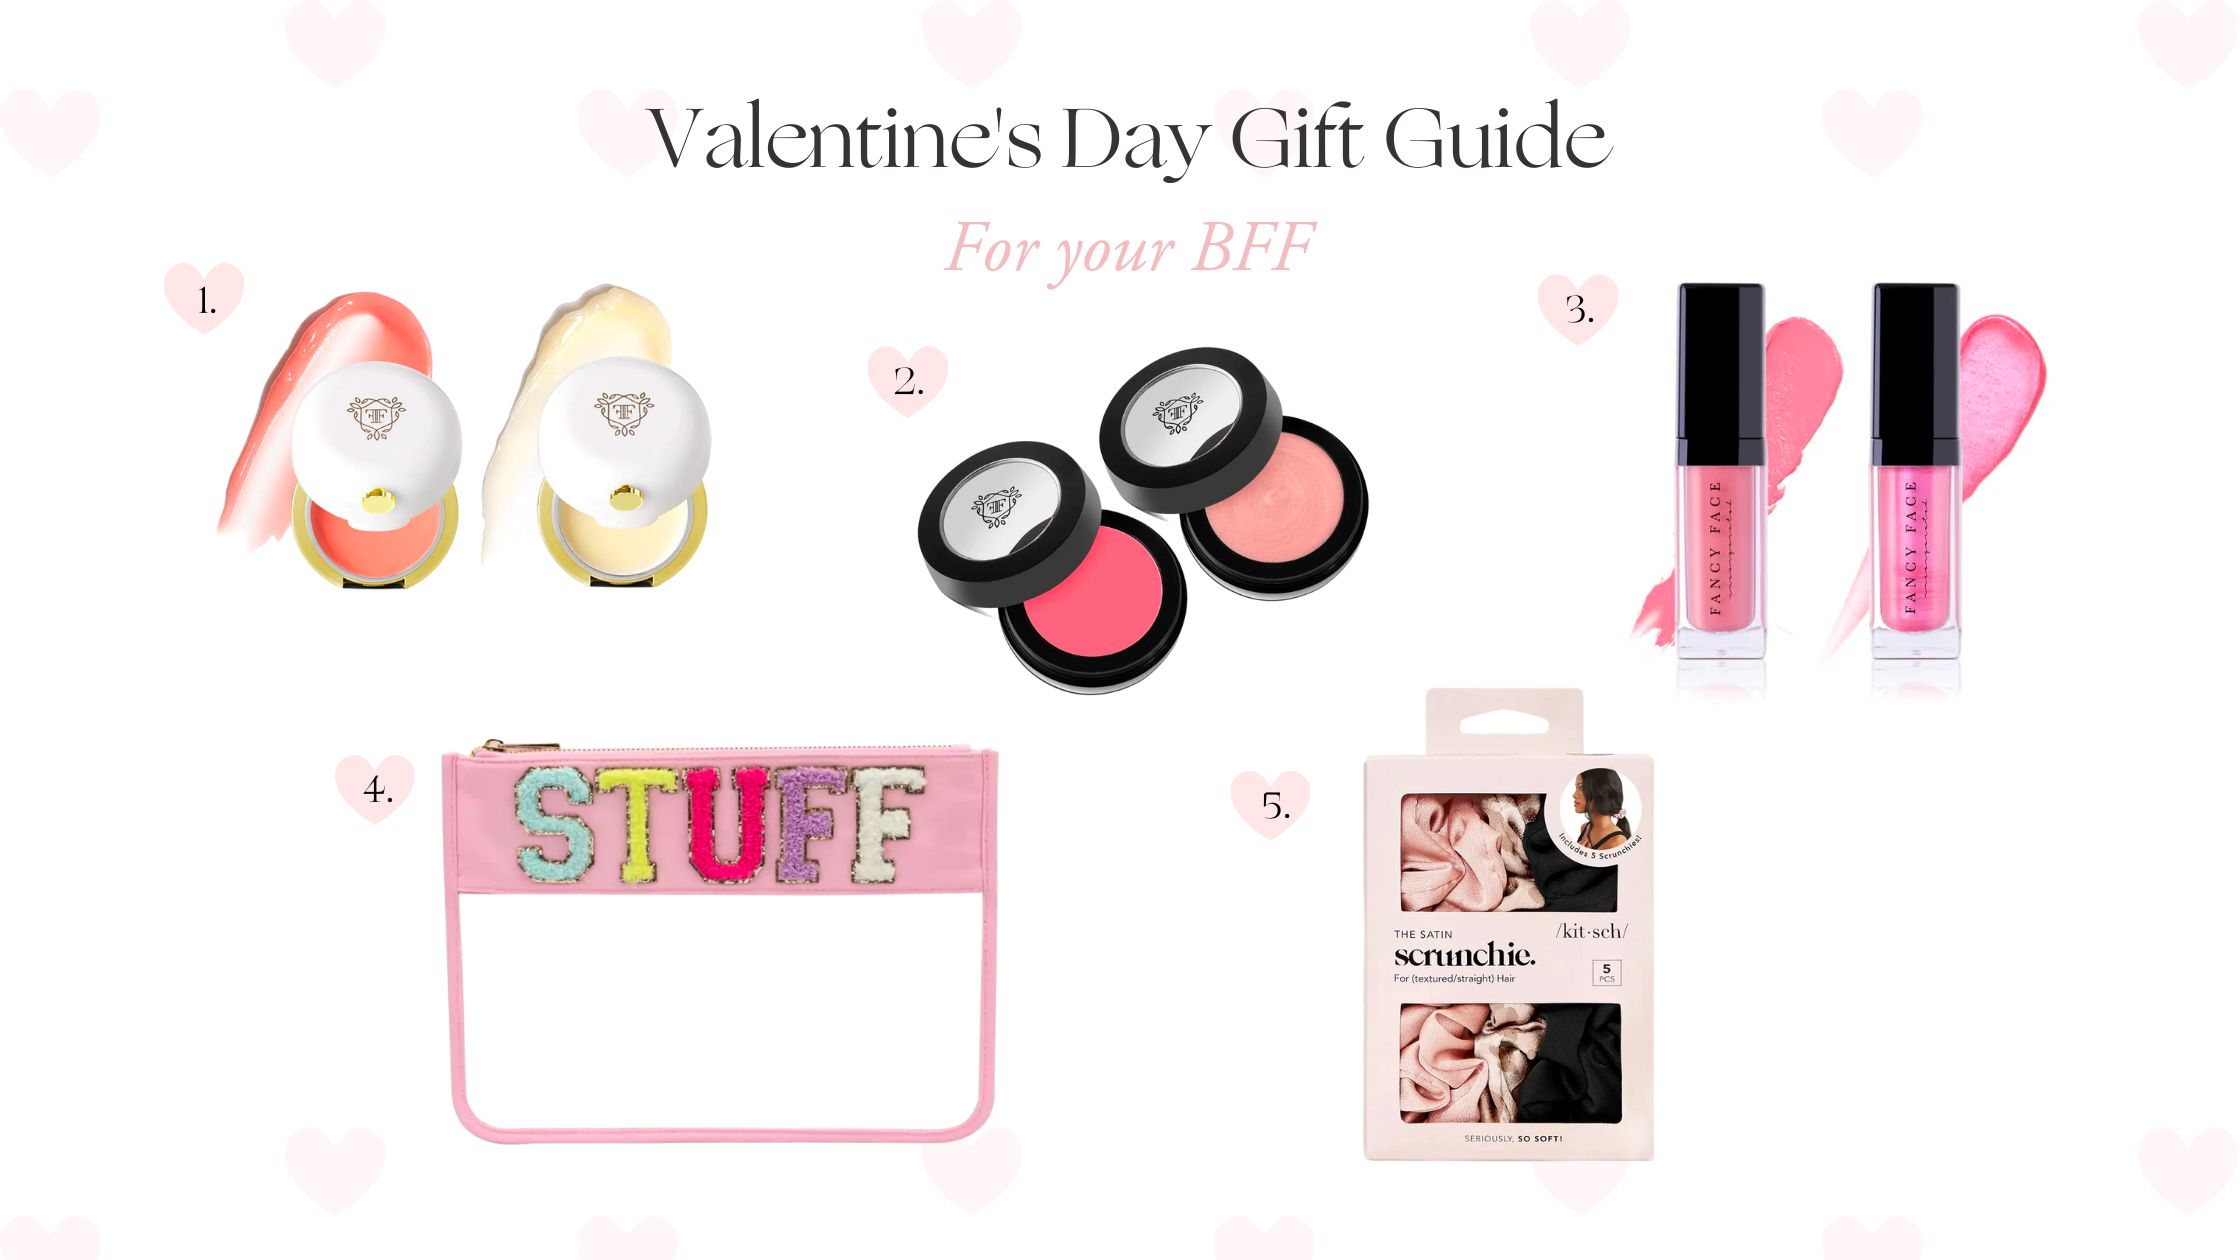 Valentine's Day Gifts for your Best Friend